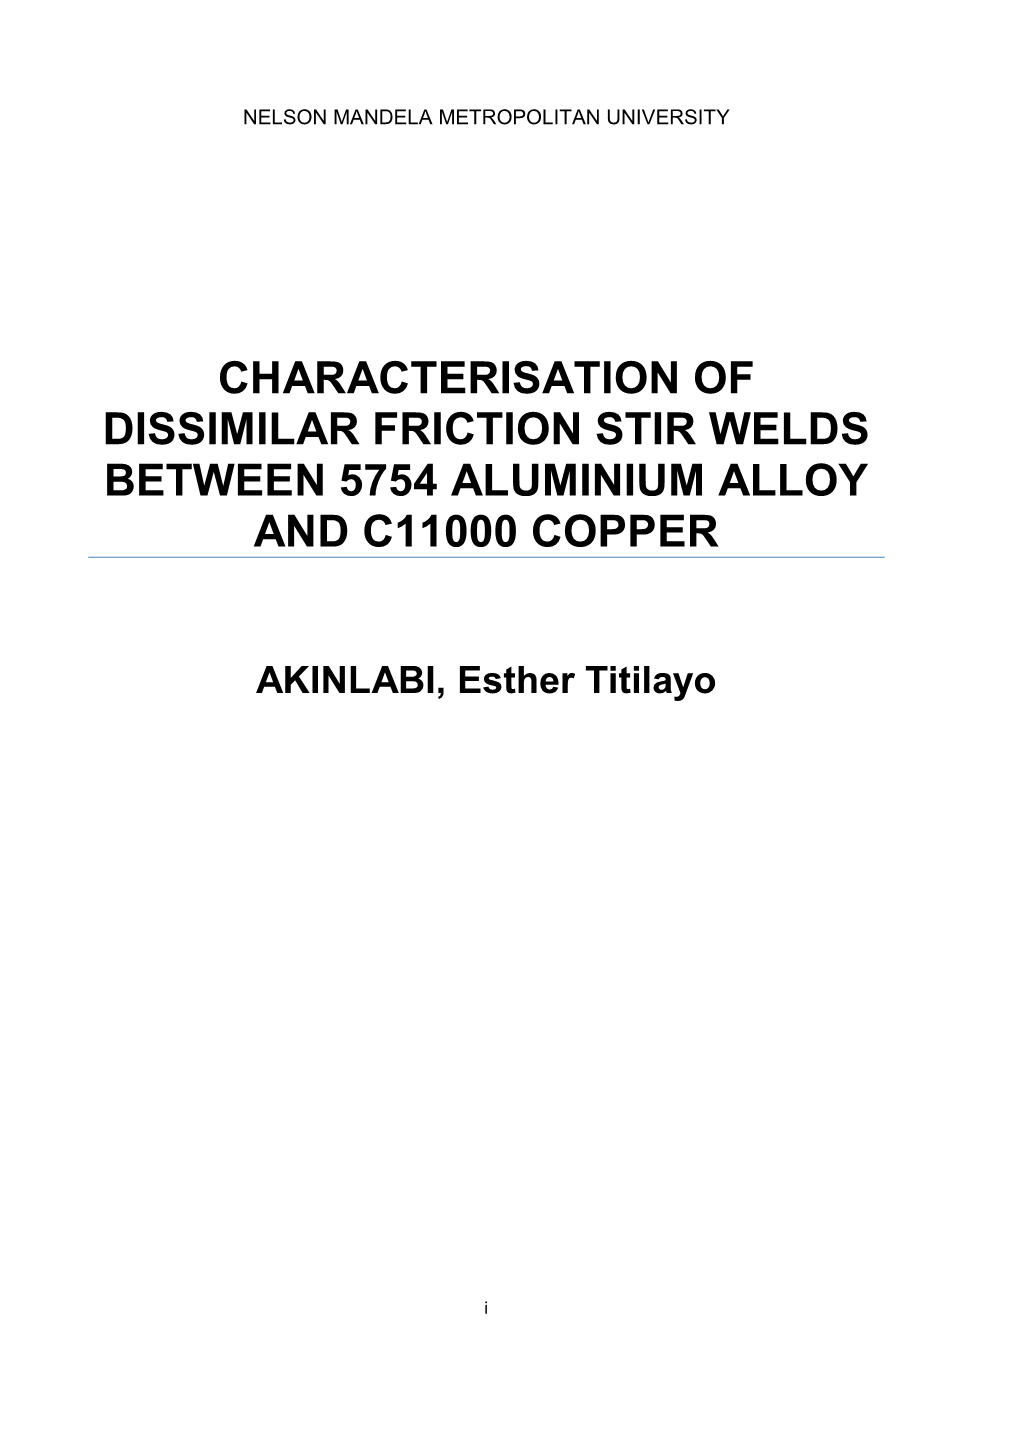 Characterisation of Dissimilar Friction Stir Welds Between 5754 Aluminium Alloy and C11000 Copper